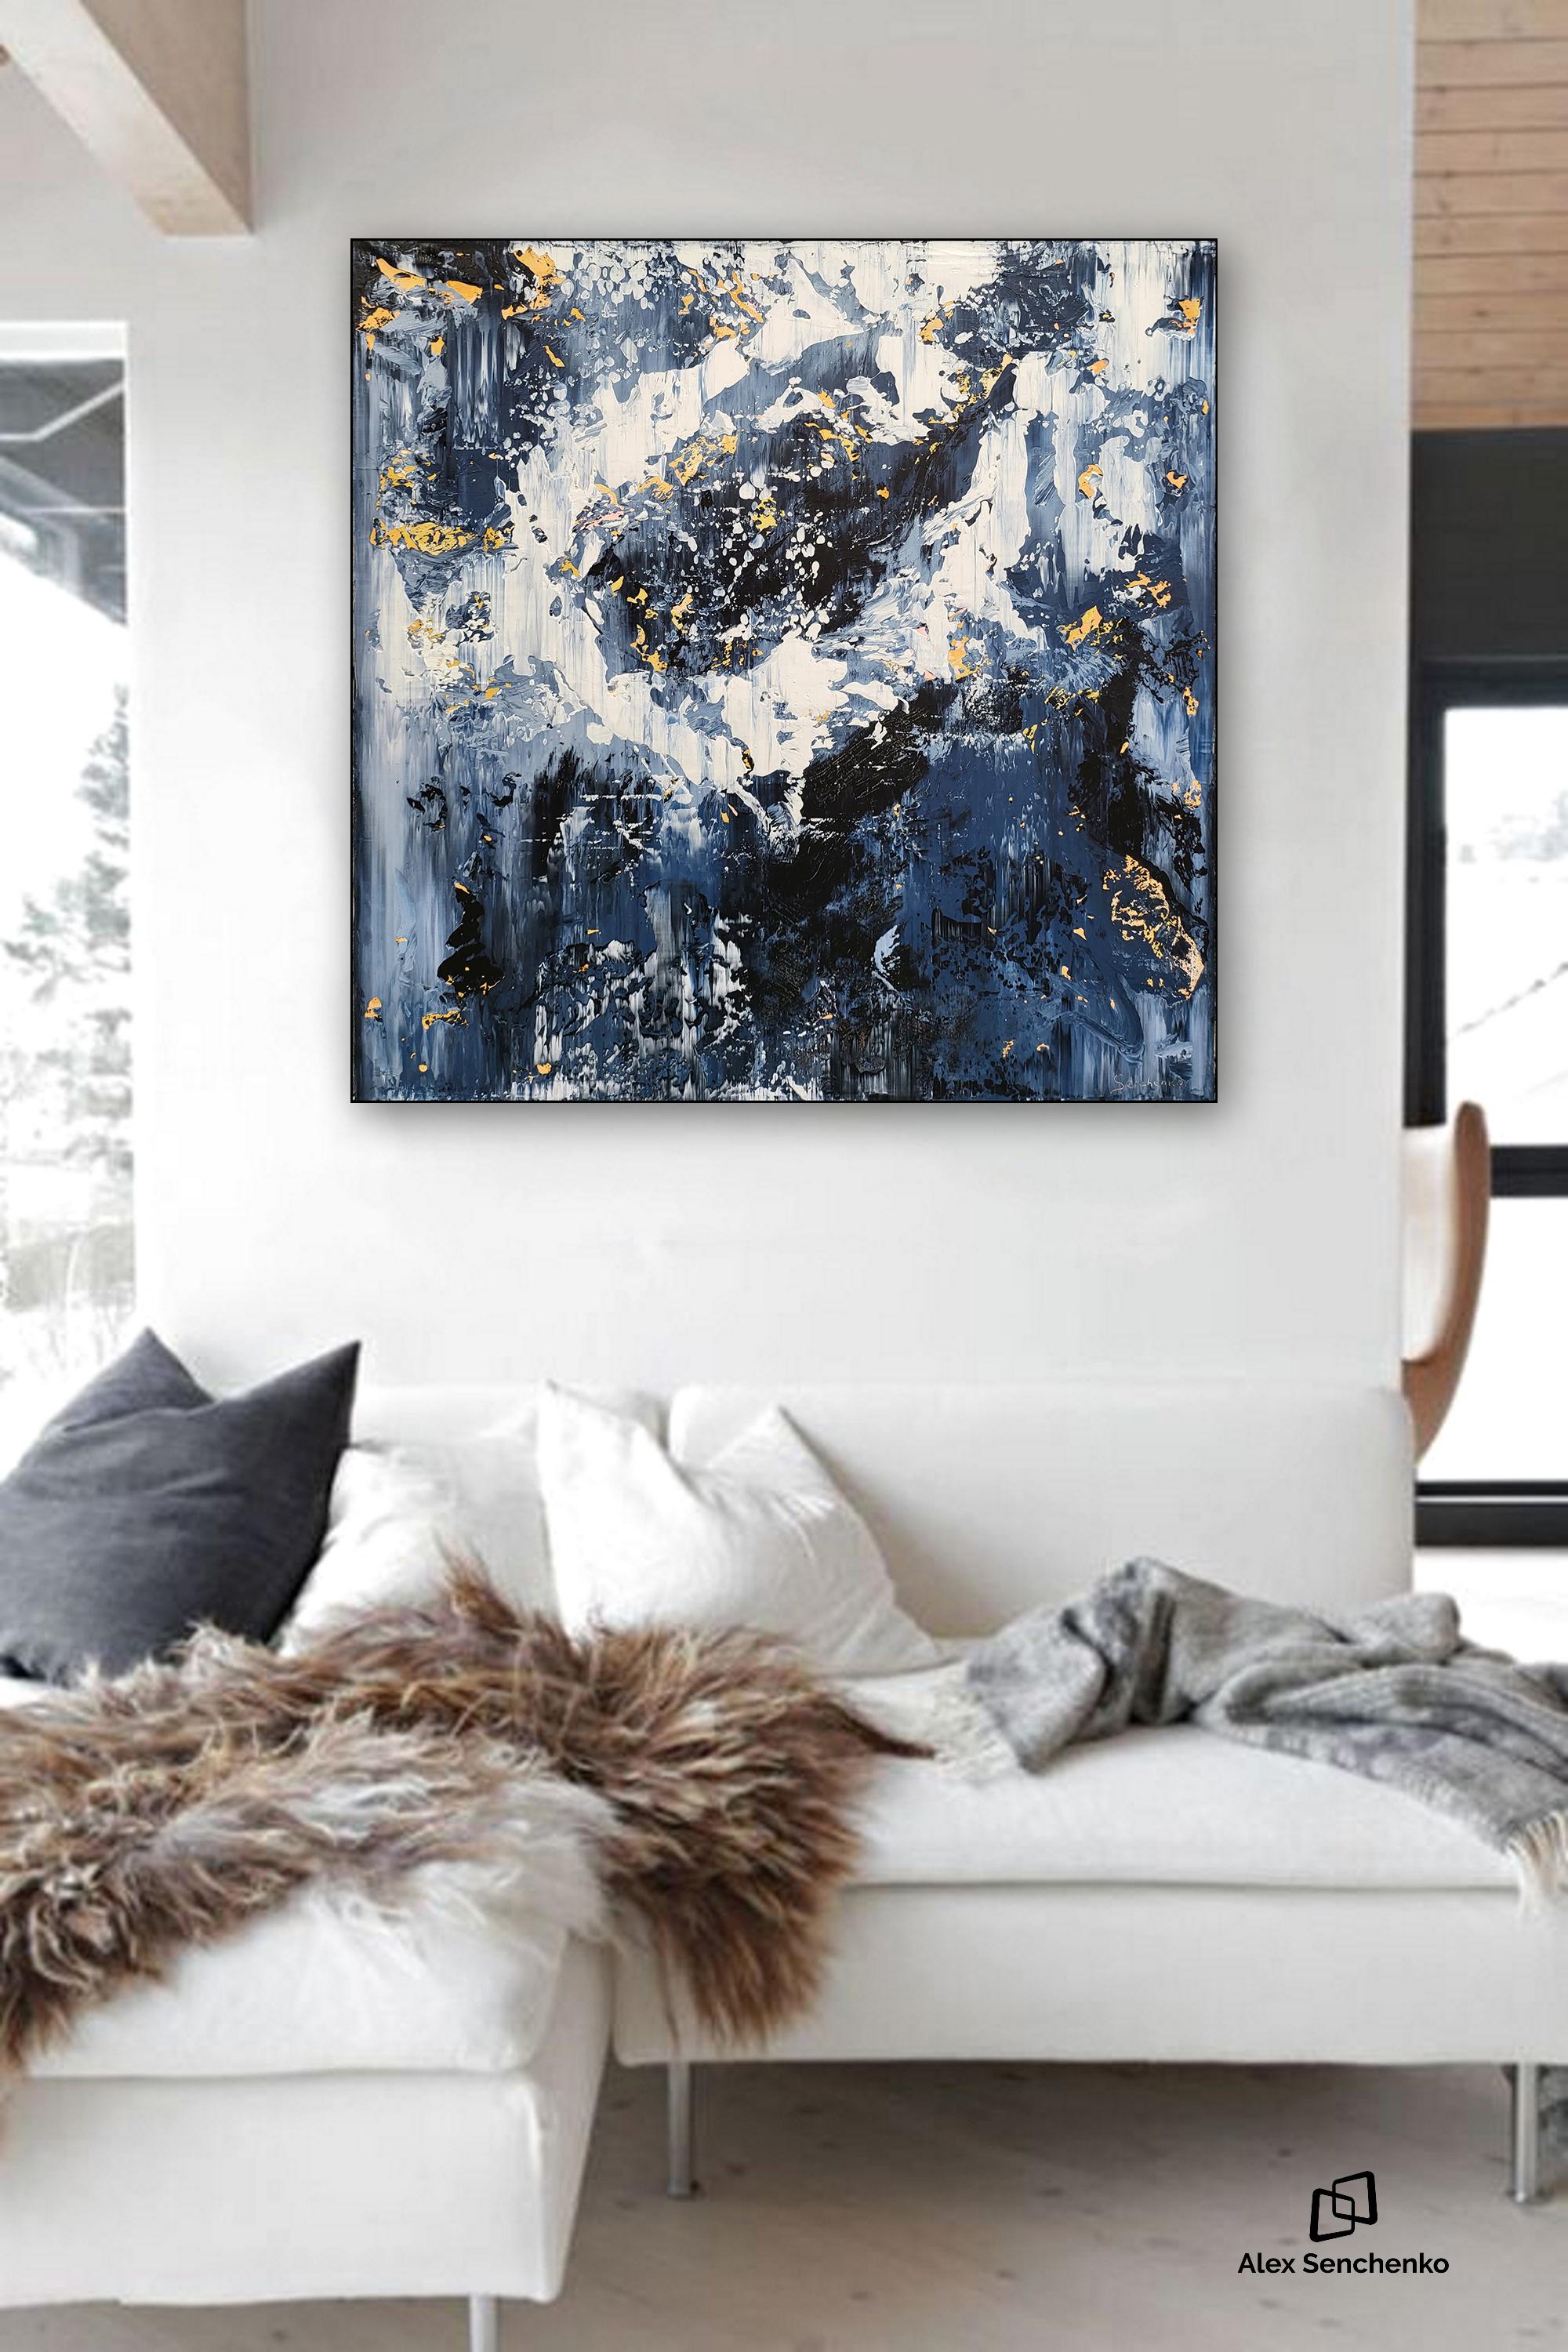 There’s something different about the homes of creative people. They like to surround themselves with inspiring things, from unique tablecloths to the incredible paintings on the walls. Alex Senchenko’s Abstract 2324. can give your home that feeling